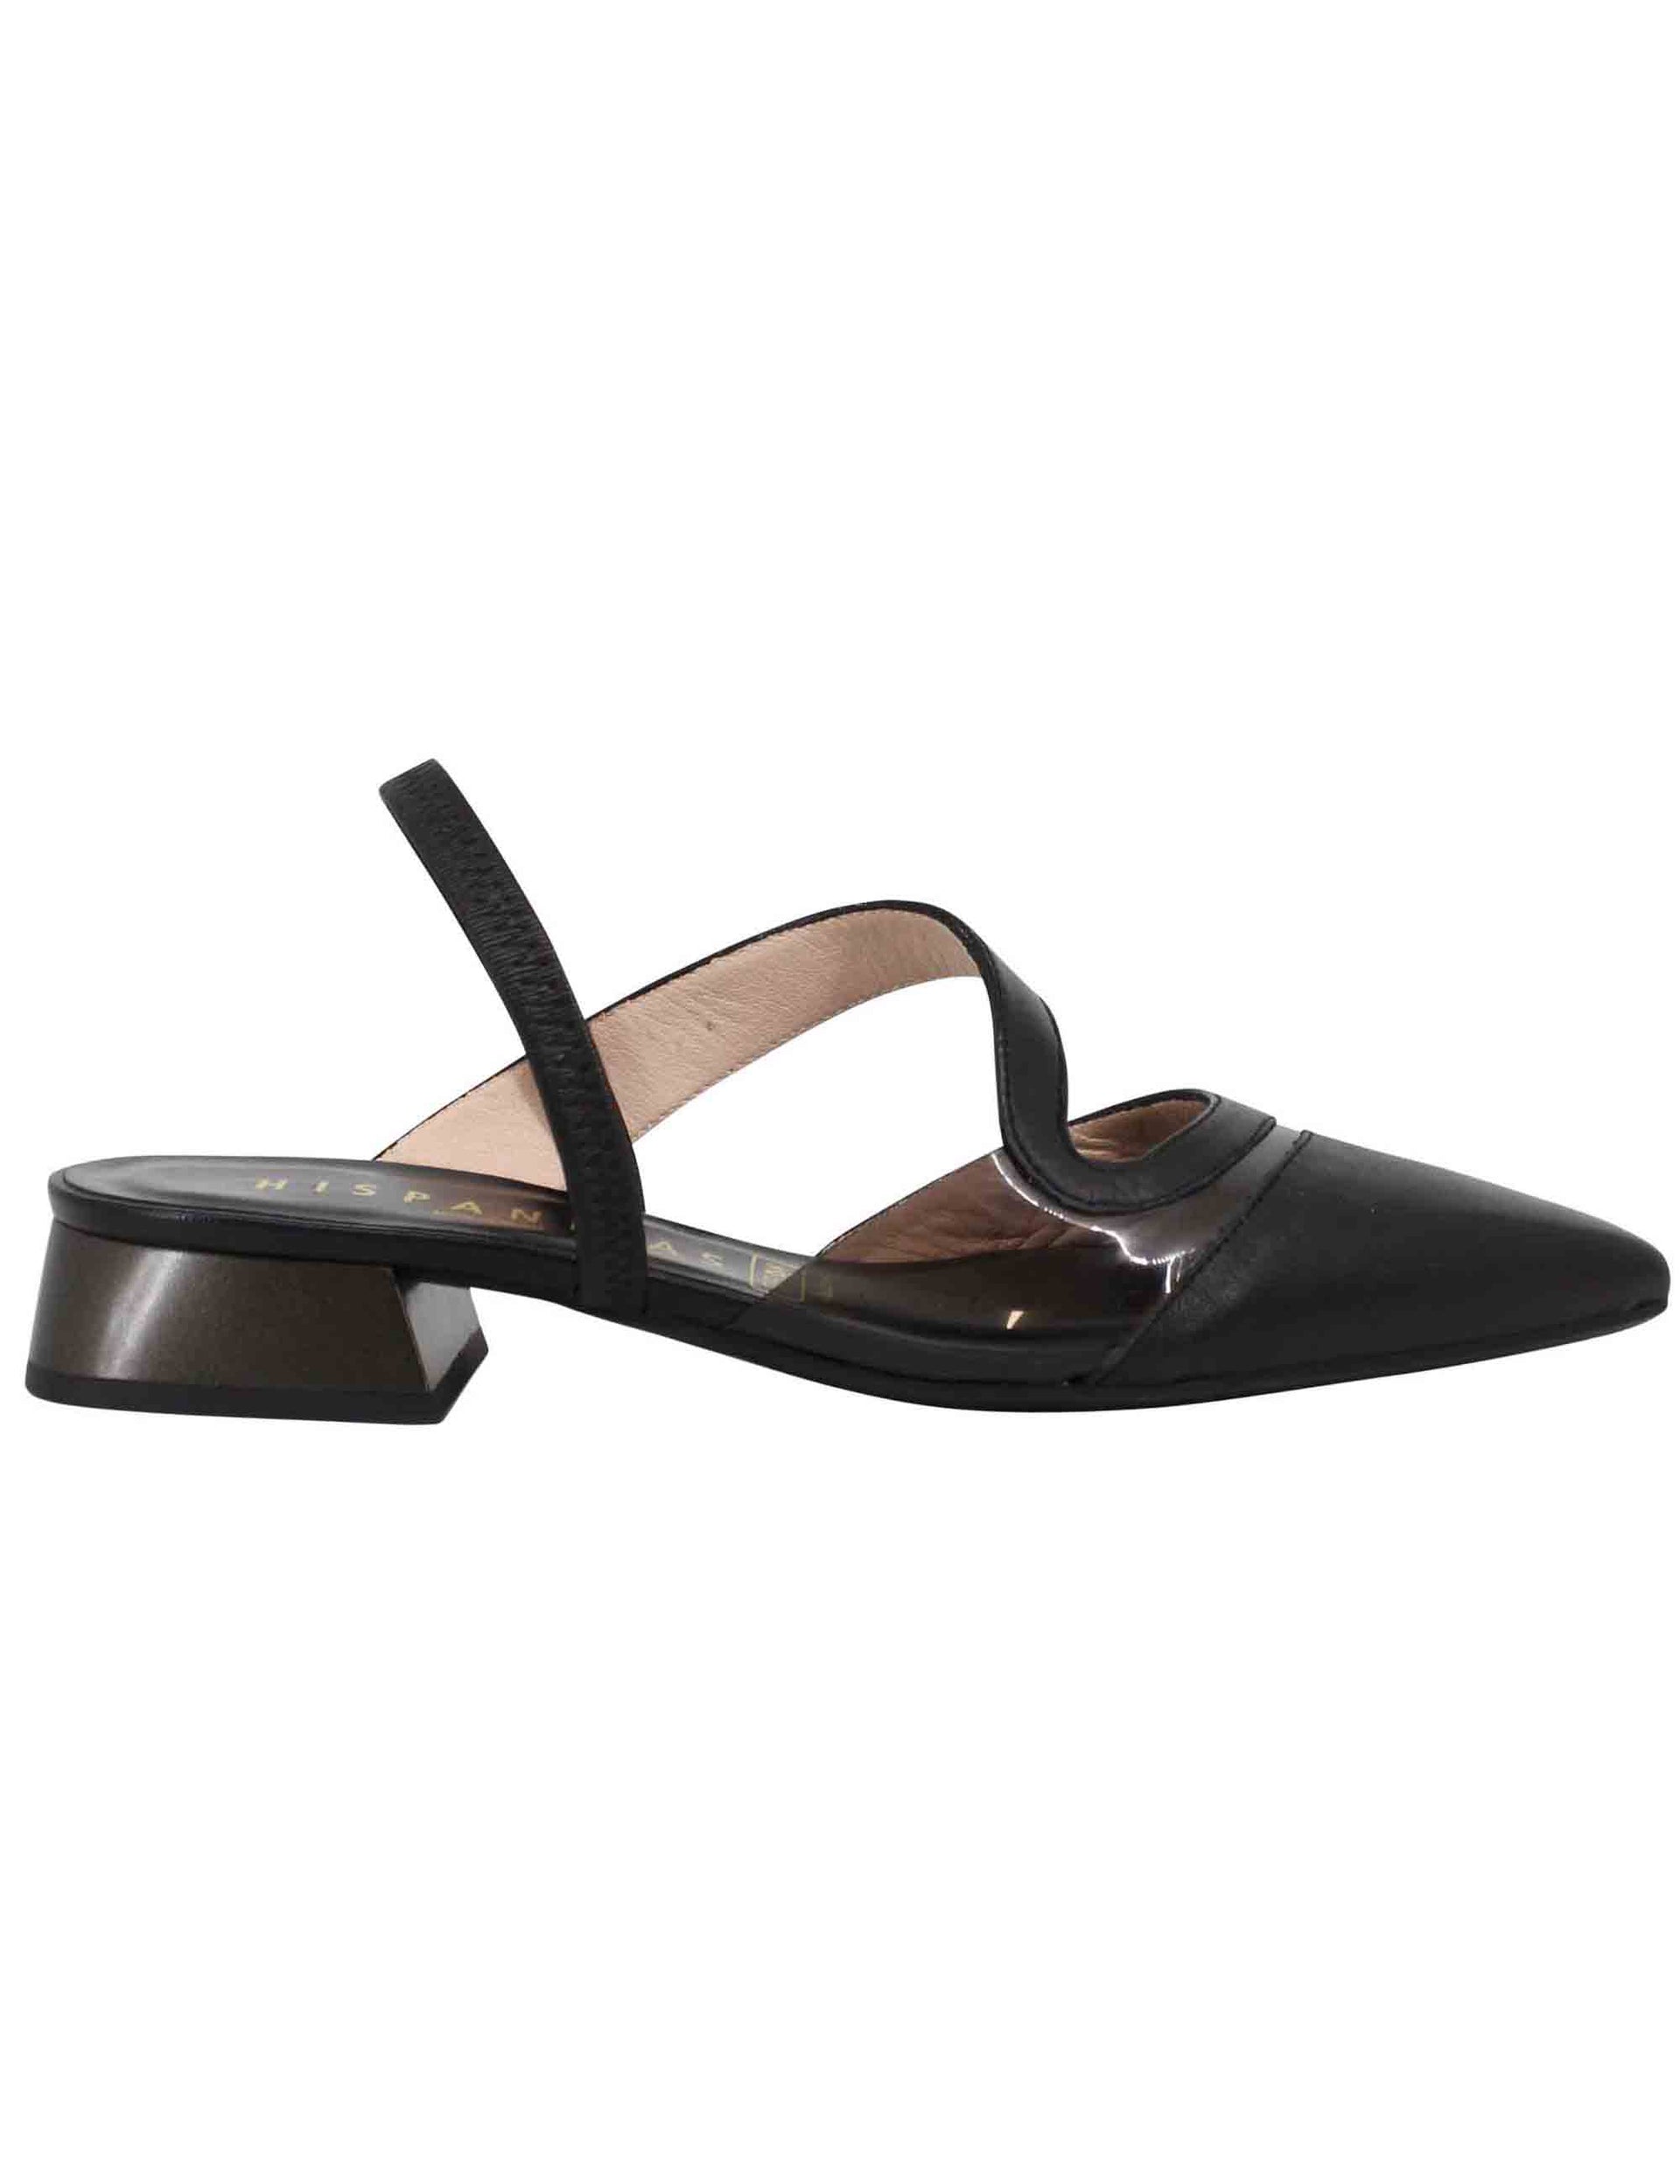 Women's slingback pumps in black leather with low heel